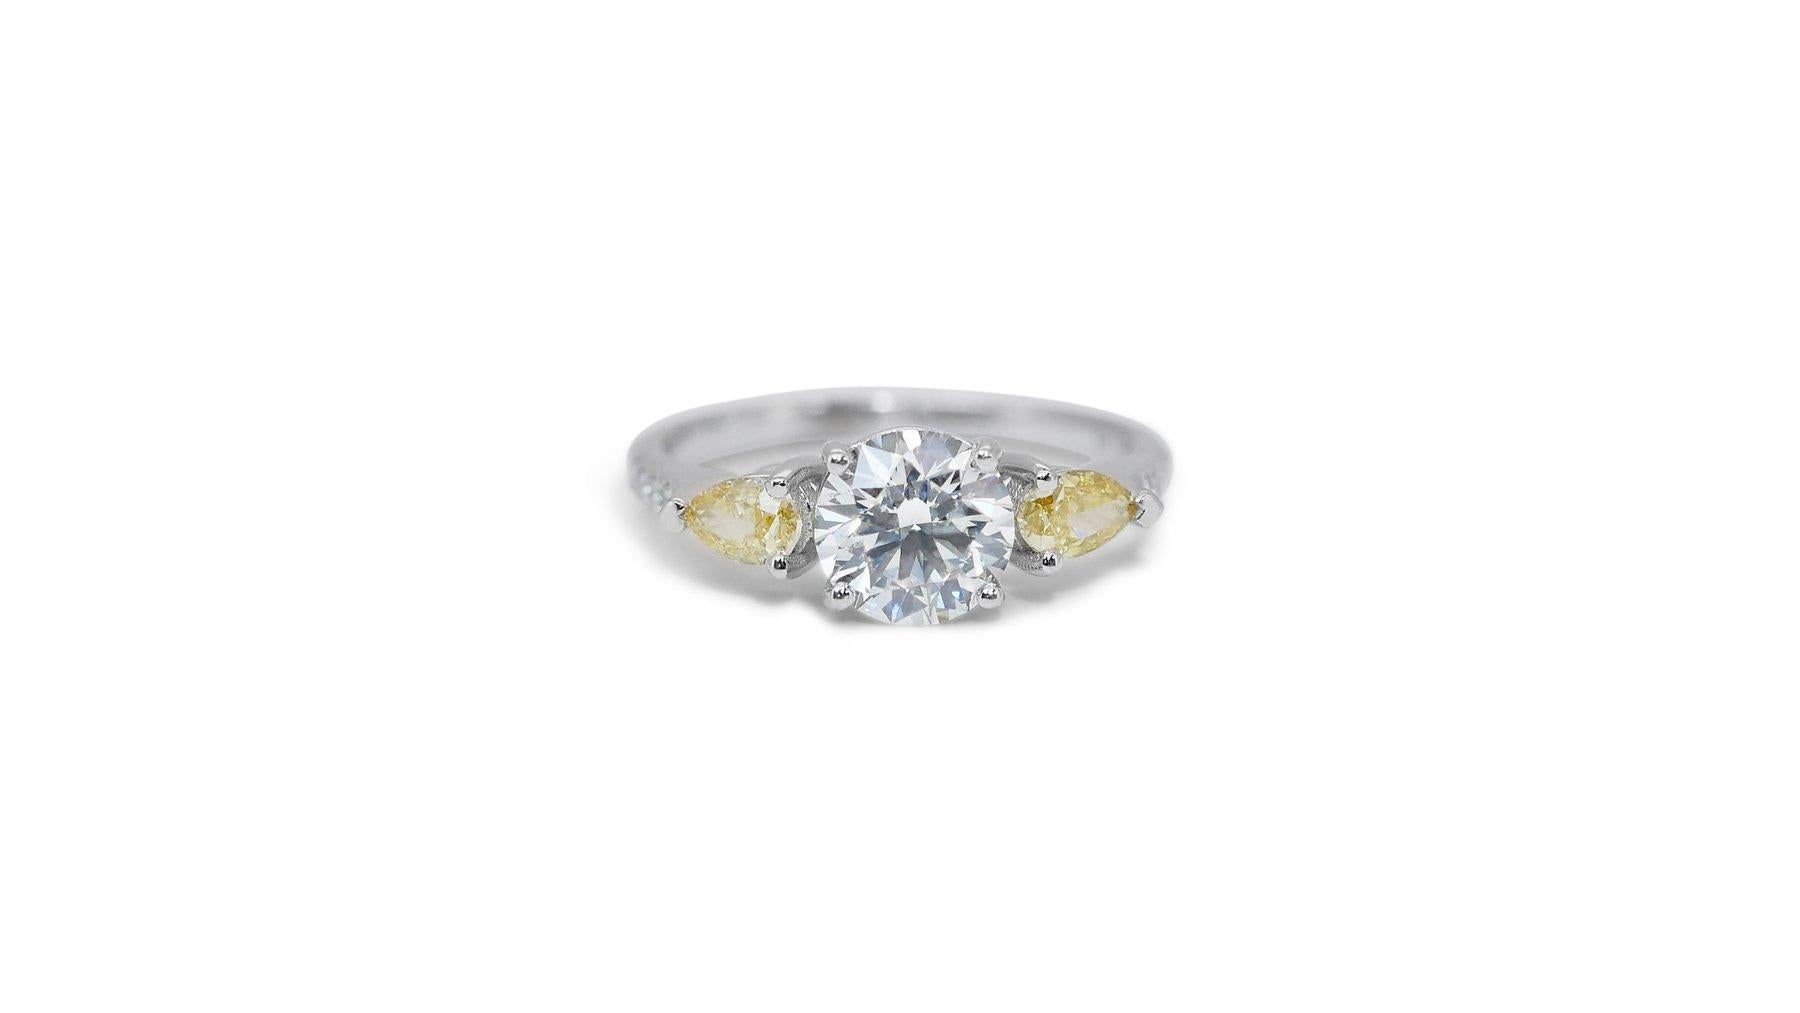 Stunning 1.37 Carat Round Brilliant Natural Diamond Ring with 0.46 Carat Fancy Intense Yellow Pear Mixed Cut and 0.065 Carat Colorless Round Brilliant Side Stones in 18K White Gold with IGI Certificate (R-1597)

This stunning diamond ring features a